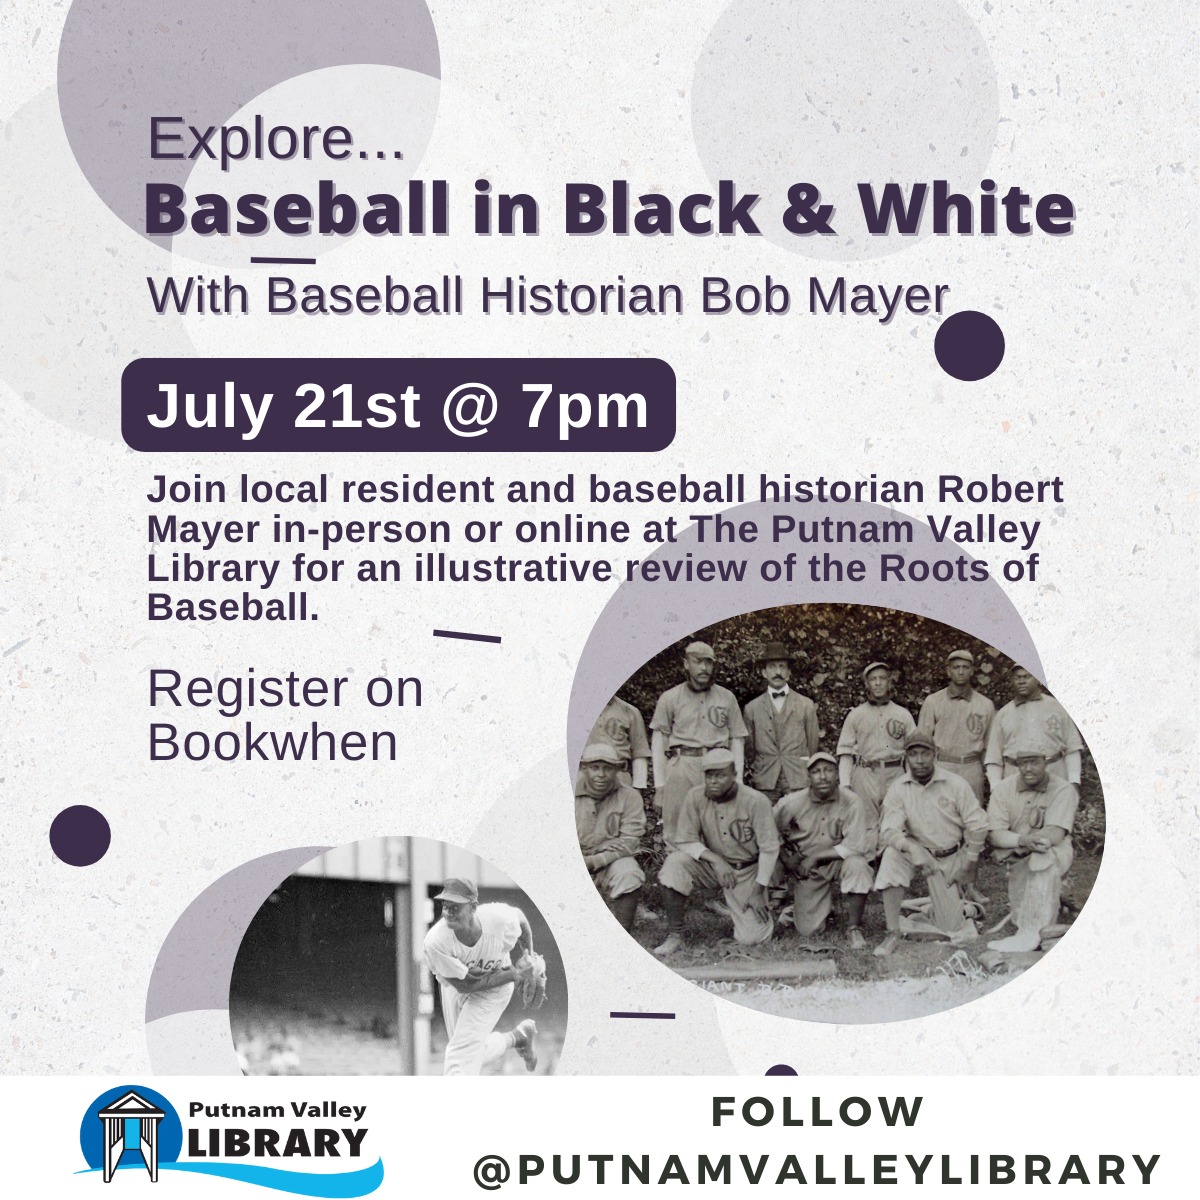 May be an image of 9 people, people standing and text that says 'Explore... Baseball in Black & White With Baseball Historian Bob Mayer July 21st 7pm Join local resident and baseball historian Robert Mayer in-person or online at The Putnam Valley Library for an illustrative review of the Roots of Baseball. Register on Bookwhen Putnam Valley LIBRARY FOLLOW @PUTNAMVALLEYLIBRARY'